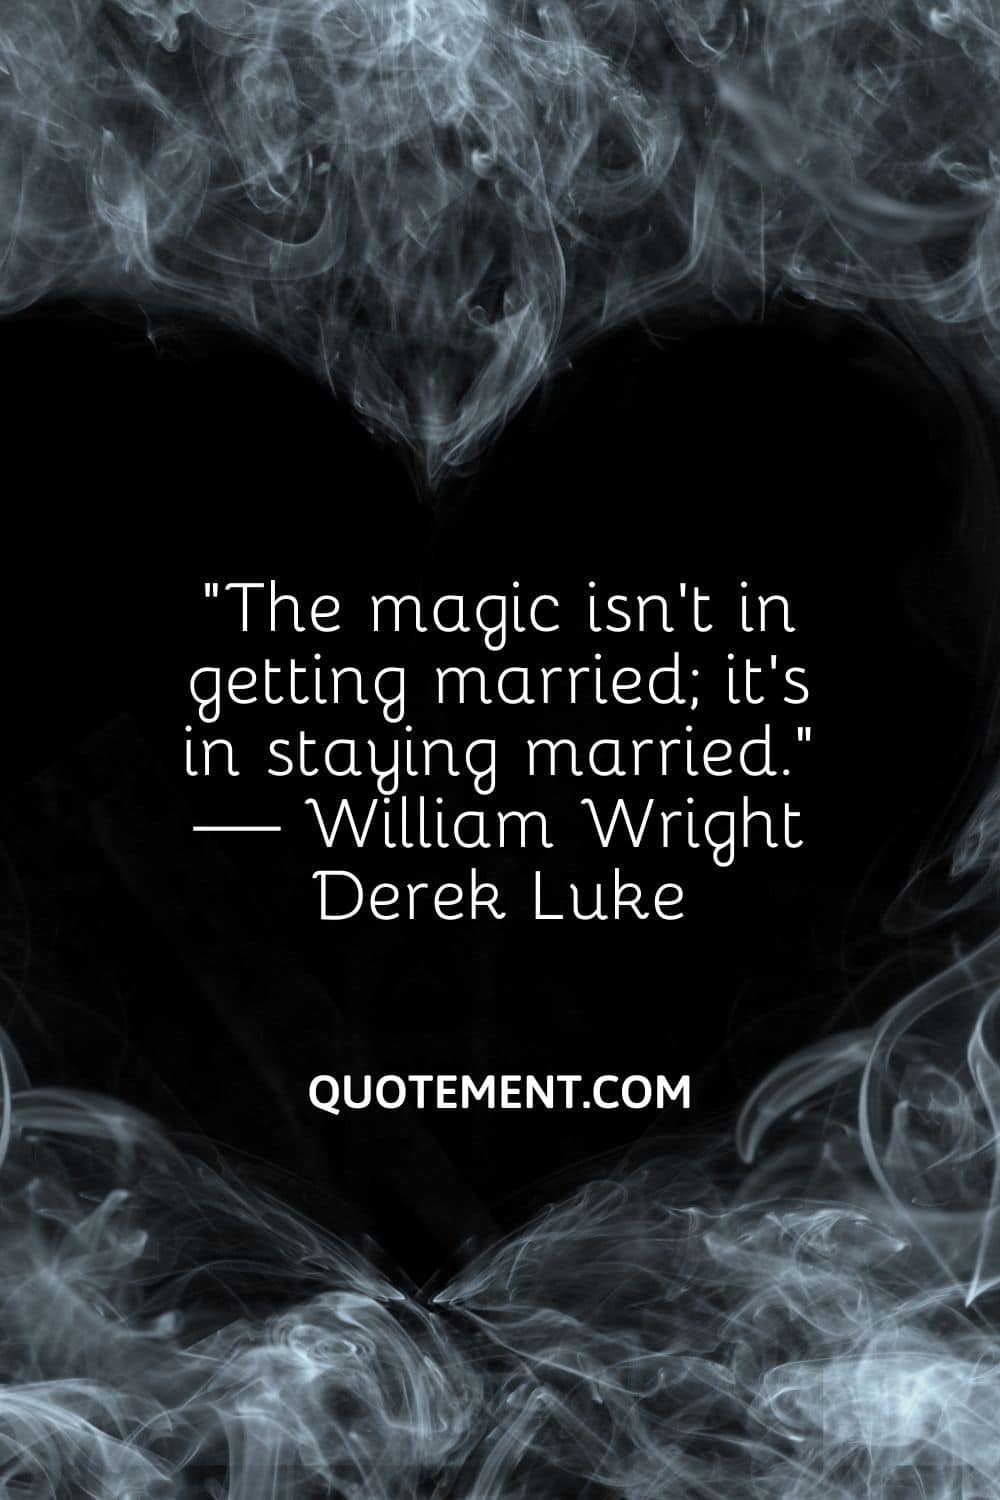 The magic isn't in getting married; it's in staying married